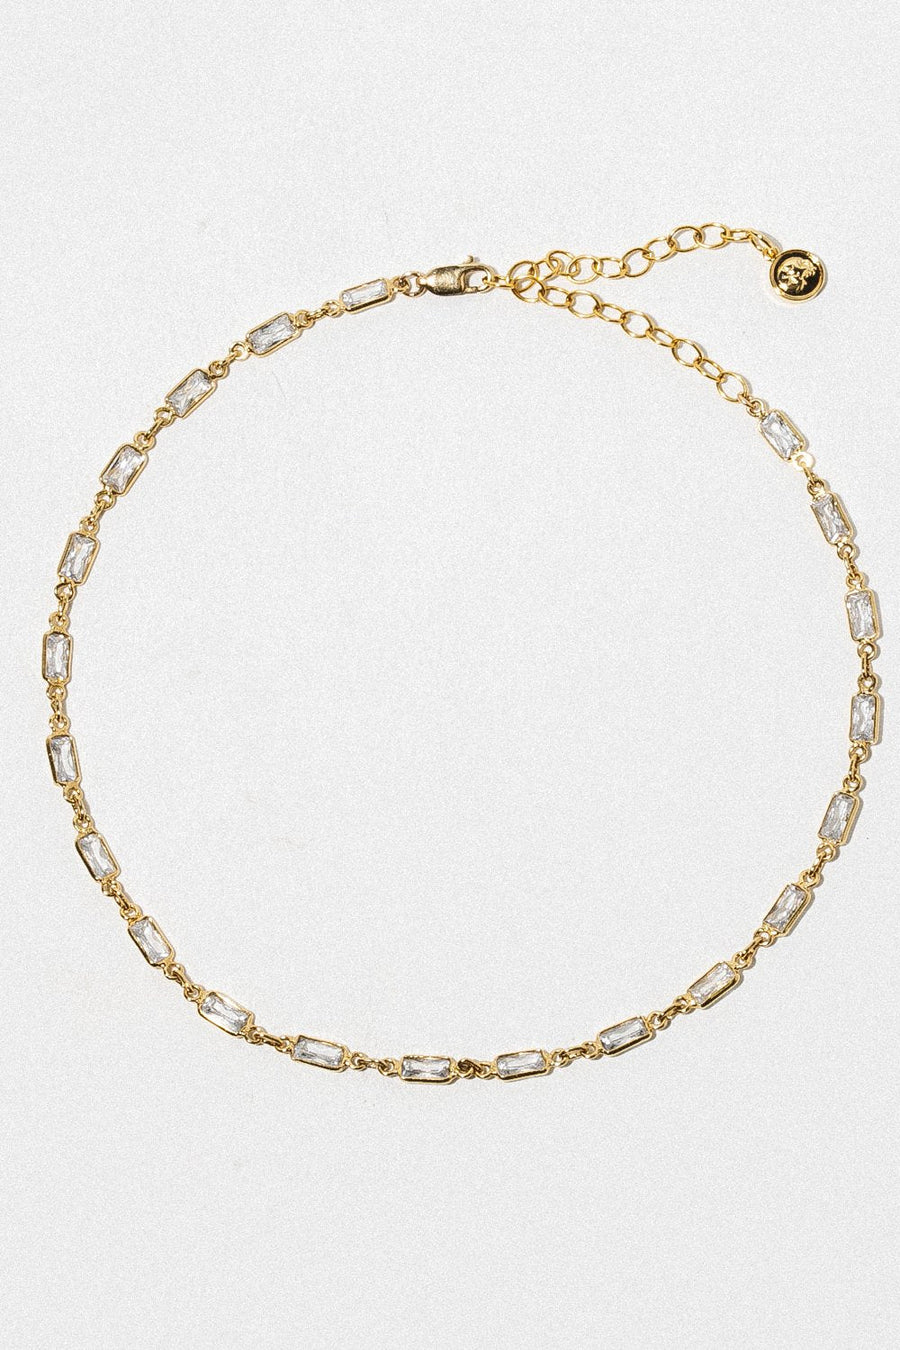 Goddess Jewelry Gold / 11 Inches nCW433